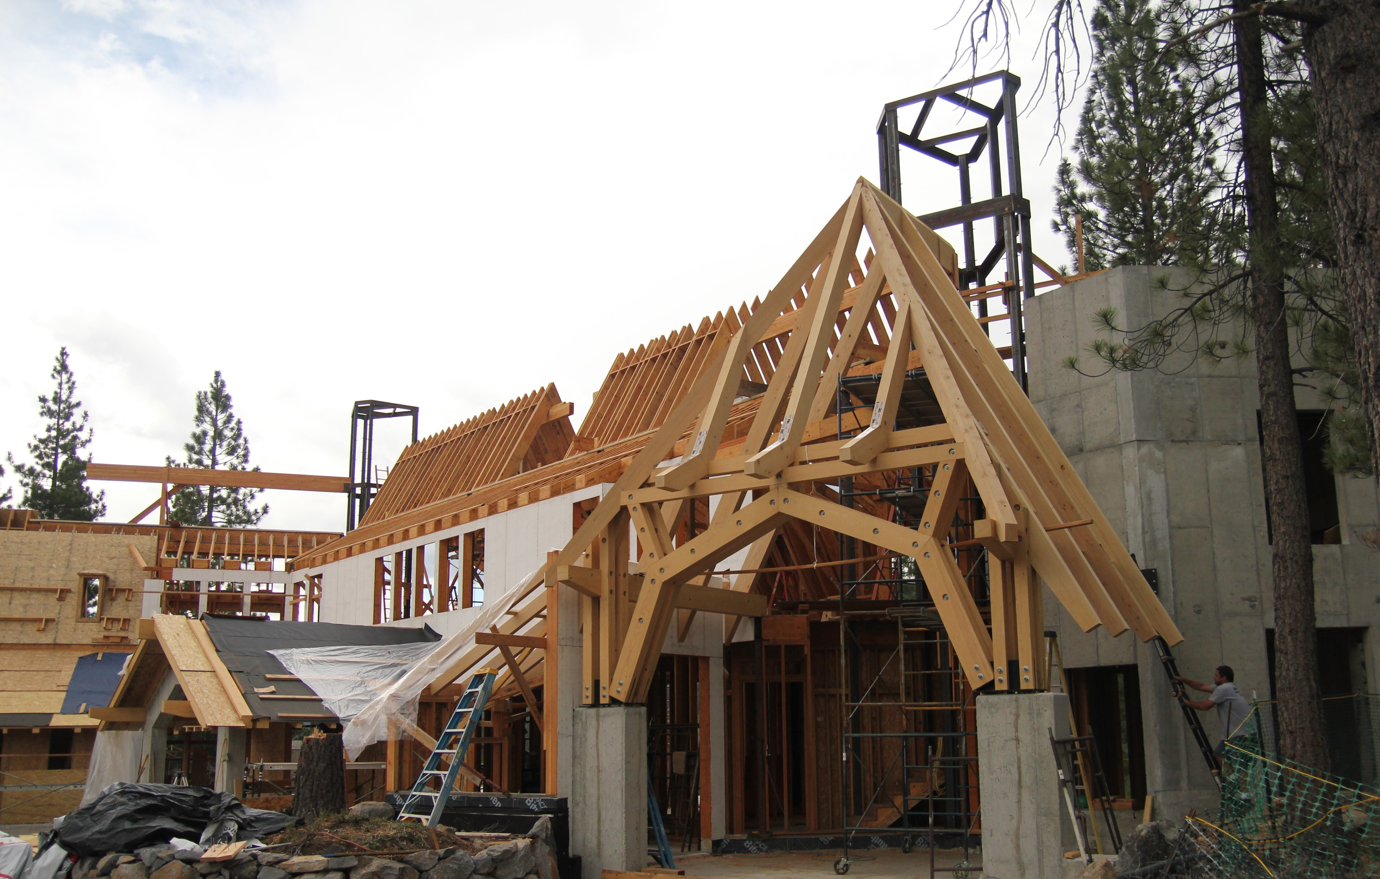 Pacific HemFir Timbers Standout in High Sierra Residential Architecture